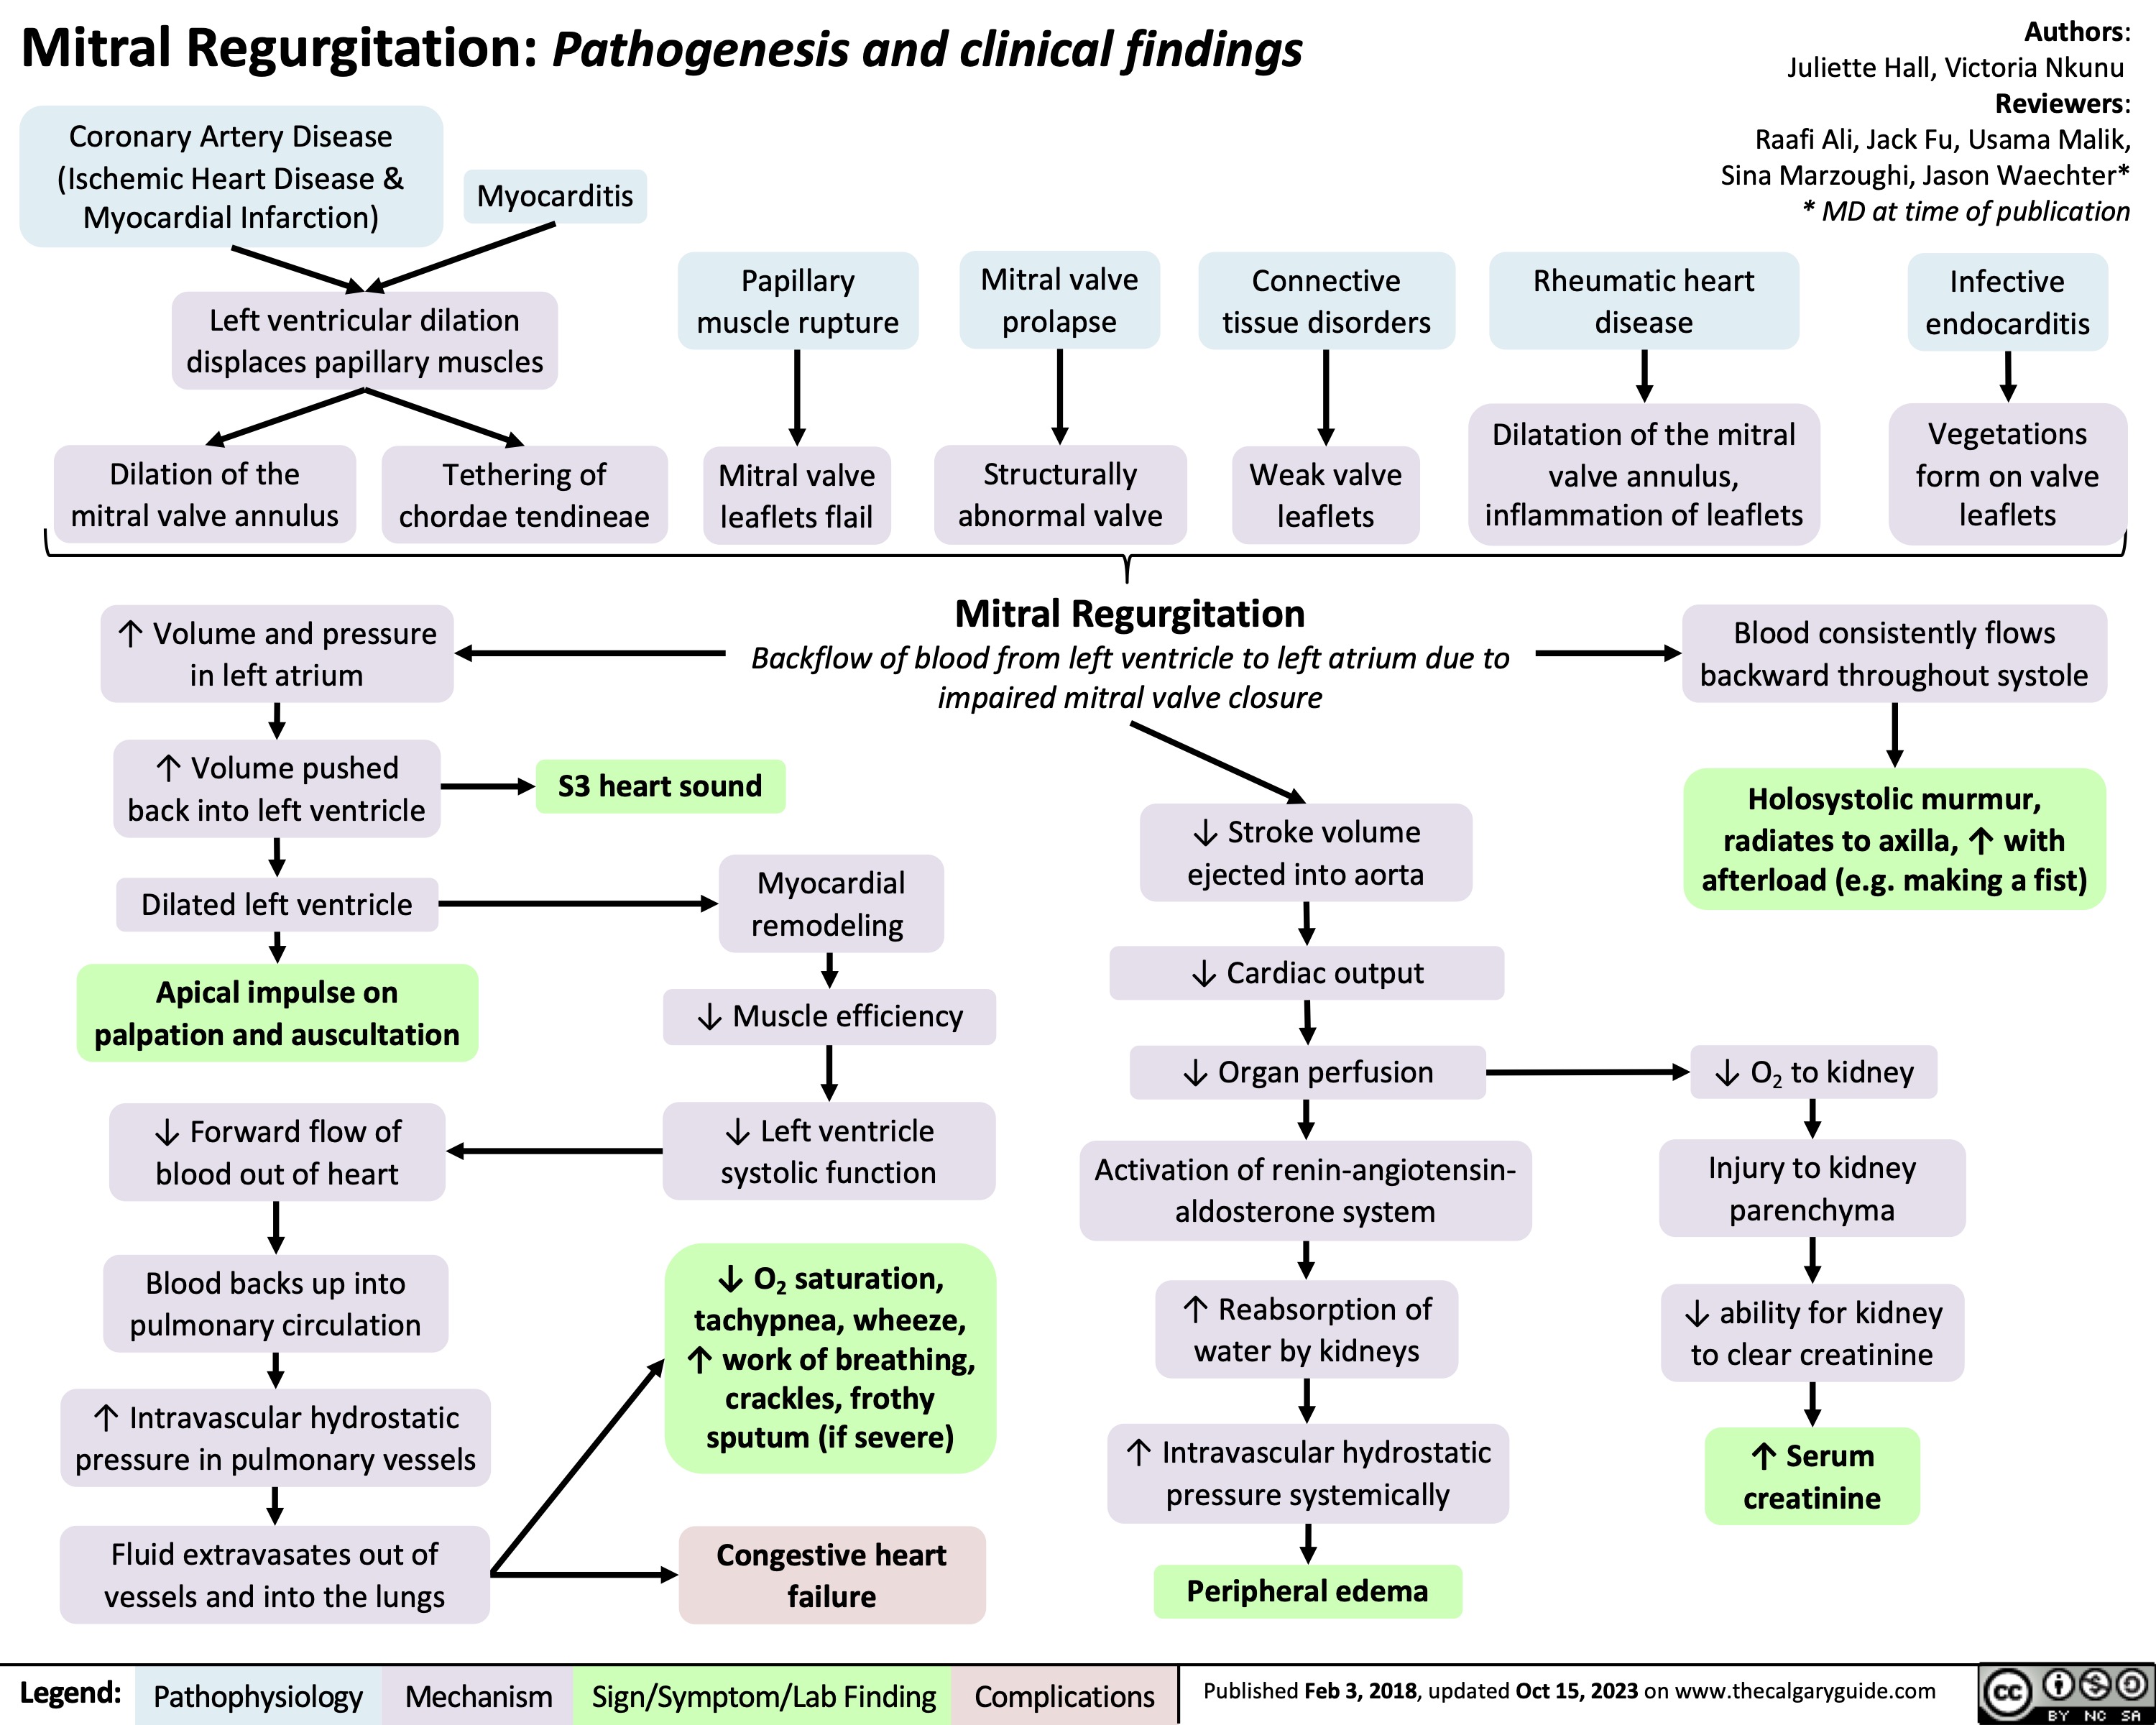 Mitral Regurgitation: Pathogenesis and clinical findings Coronary Artery Disease
Authors: Juliette Hall, Victoria Nkunu
Reviewers: Raafi Ali, Jack Fu, Usama Malik, Sina Marzoughi, Jason Waechter* * MD at time of publication
 (Ischemic Heart Disease & Myocardial Infarction)
Myocarditis
         Left ventricular dilation displaces papillary muscles
Dilation of the Tethering of mitral valve annulus chordae tendineae
↑ Volume and pressure in left atrium
↑ Volume pushed back into left ventricle
Dilated left ventricle
Apical impulse on palpation and auscultation
↓ Forward flow of blood out of heart
Blood backs up into pulmonary circulation
↑ Intravascular hydrostatic pressure in pulmonary vessels
Fluid extravasates out of vessels and into the lungs
Papillary muscle rupture
Mitral valve leaflets flail
Mitral valve prolapse
Structurally abnormal valve
Connective tissue disorders
Weak valve leaflets
Rheumatic heart disease
Dilatation of the mitral valve annulus, inflammation of leaflets
Infective endocarditis
Vegetations form on valve leaflets
             Mitral Regurgitation
Blood consistently flows backward throughout systole
Holosystolic murmur, radiates to axilla, ↑ with afterload (e.g. making a fist)
  Backflow of blood from left ventricle to left atrium due to impaired mitral valve closure
     S3 heart sound
Myocardial remodeling
↓ Muscle efficiency
↓ Left ventricle systolic function
↓ O2 saturation, tachypnea, wheeze, ↑ work of breathing, crackles, frothy sputum (if severe)
Congestive heart failure
↓ Stroke volume ejected into aorta
      ↓ Cardiac output
↓ Organ perfusion       ↓ O2 to kidney
       Activation of renin-angiotensin- aldosterone system
↑ Reabsorption of water by kidneys
↑ Intravascular hydrostatic pressure systemically
Peripheral edema
Injury to kidney parenchyma
↓ ability for kidney to clear creatinine
↑ Serum creatinine
            Legend:
 Pathophysiology
Mechanism
Sign/Symptom/Lab Finding
 Complications
 Published Feb 3, 2018, updated Oct 15, 2023 on www.thecalgaryguide.com
   